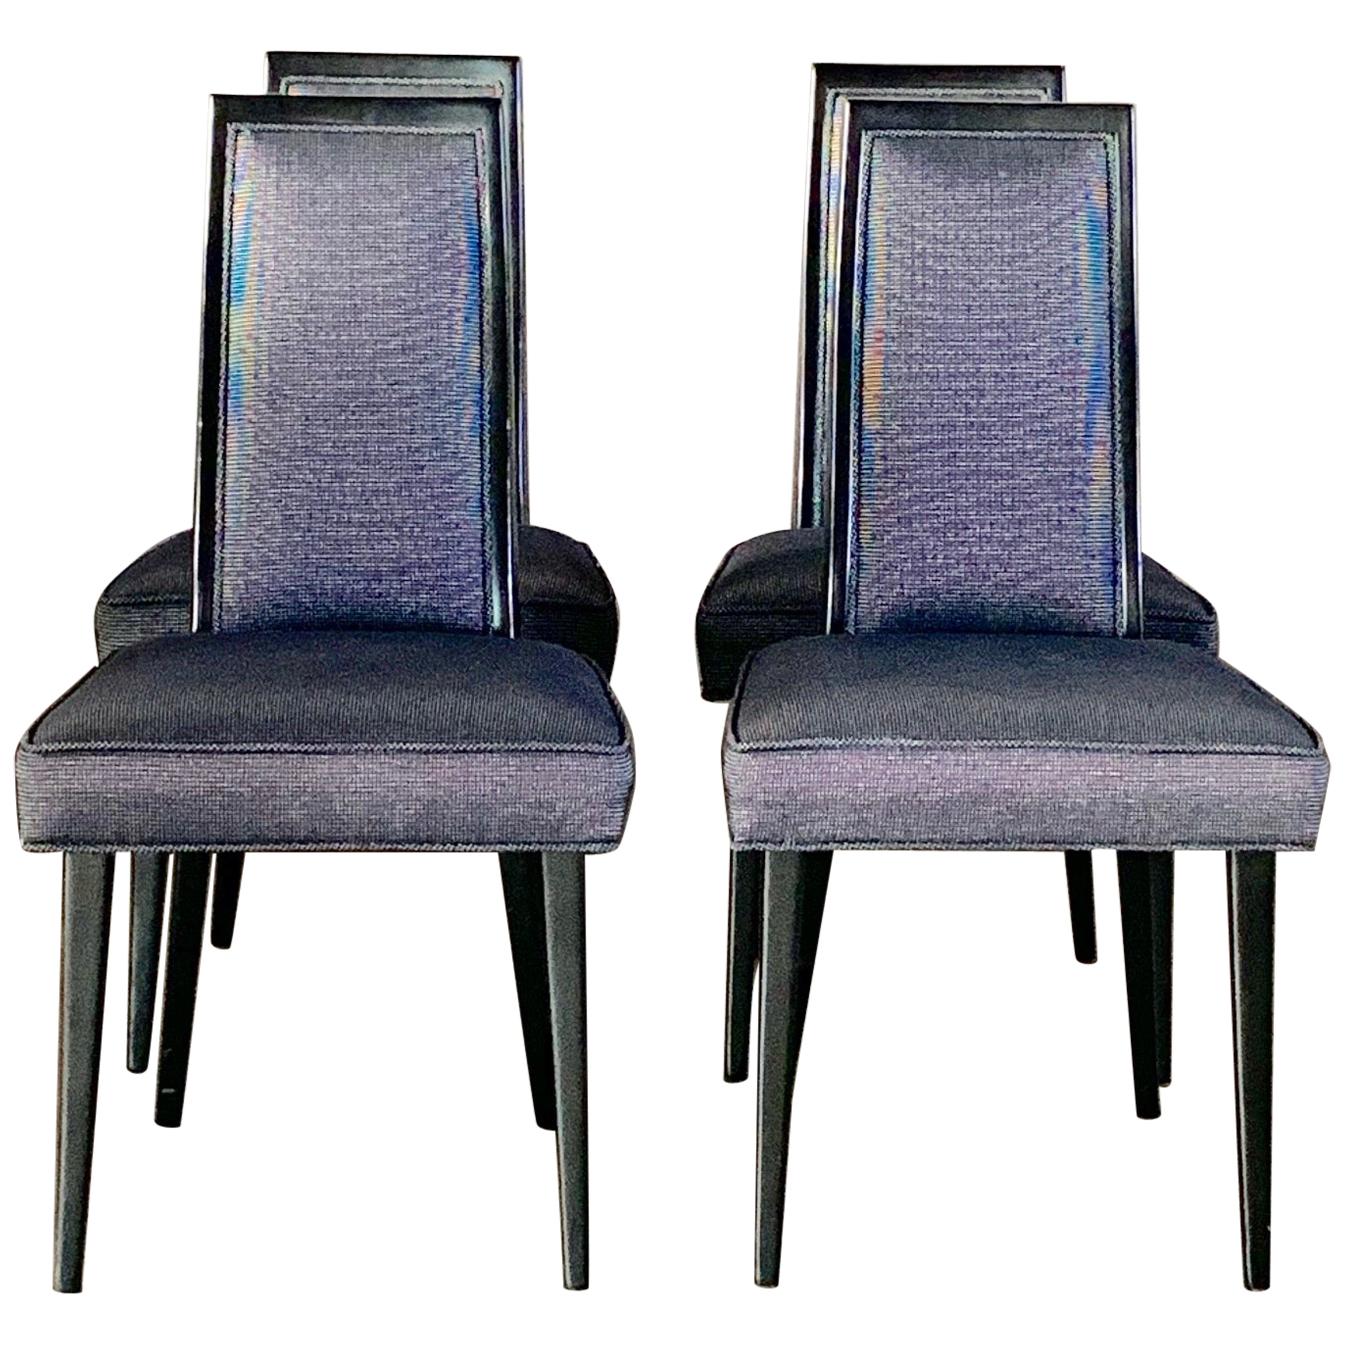 Set of Four Elegant Dining Chairs by Harvey Probber